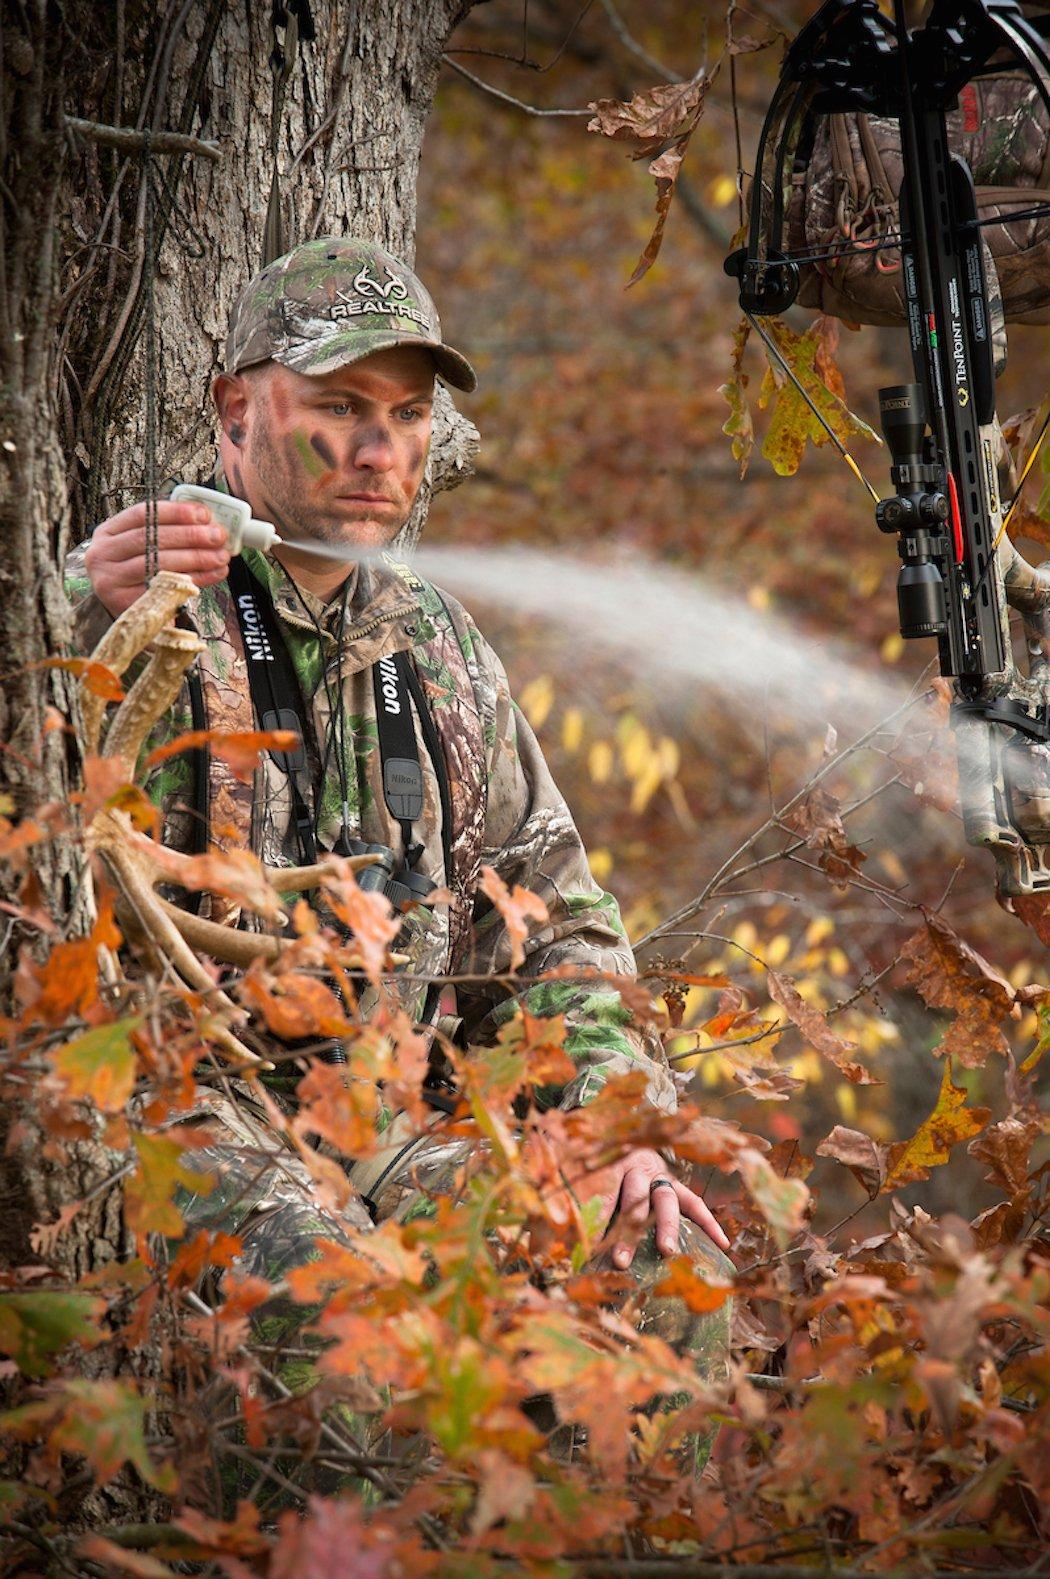 Playing the wind is a very important part of deer hunting. (Realtree photo)